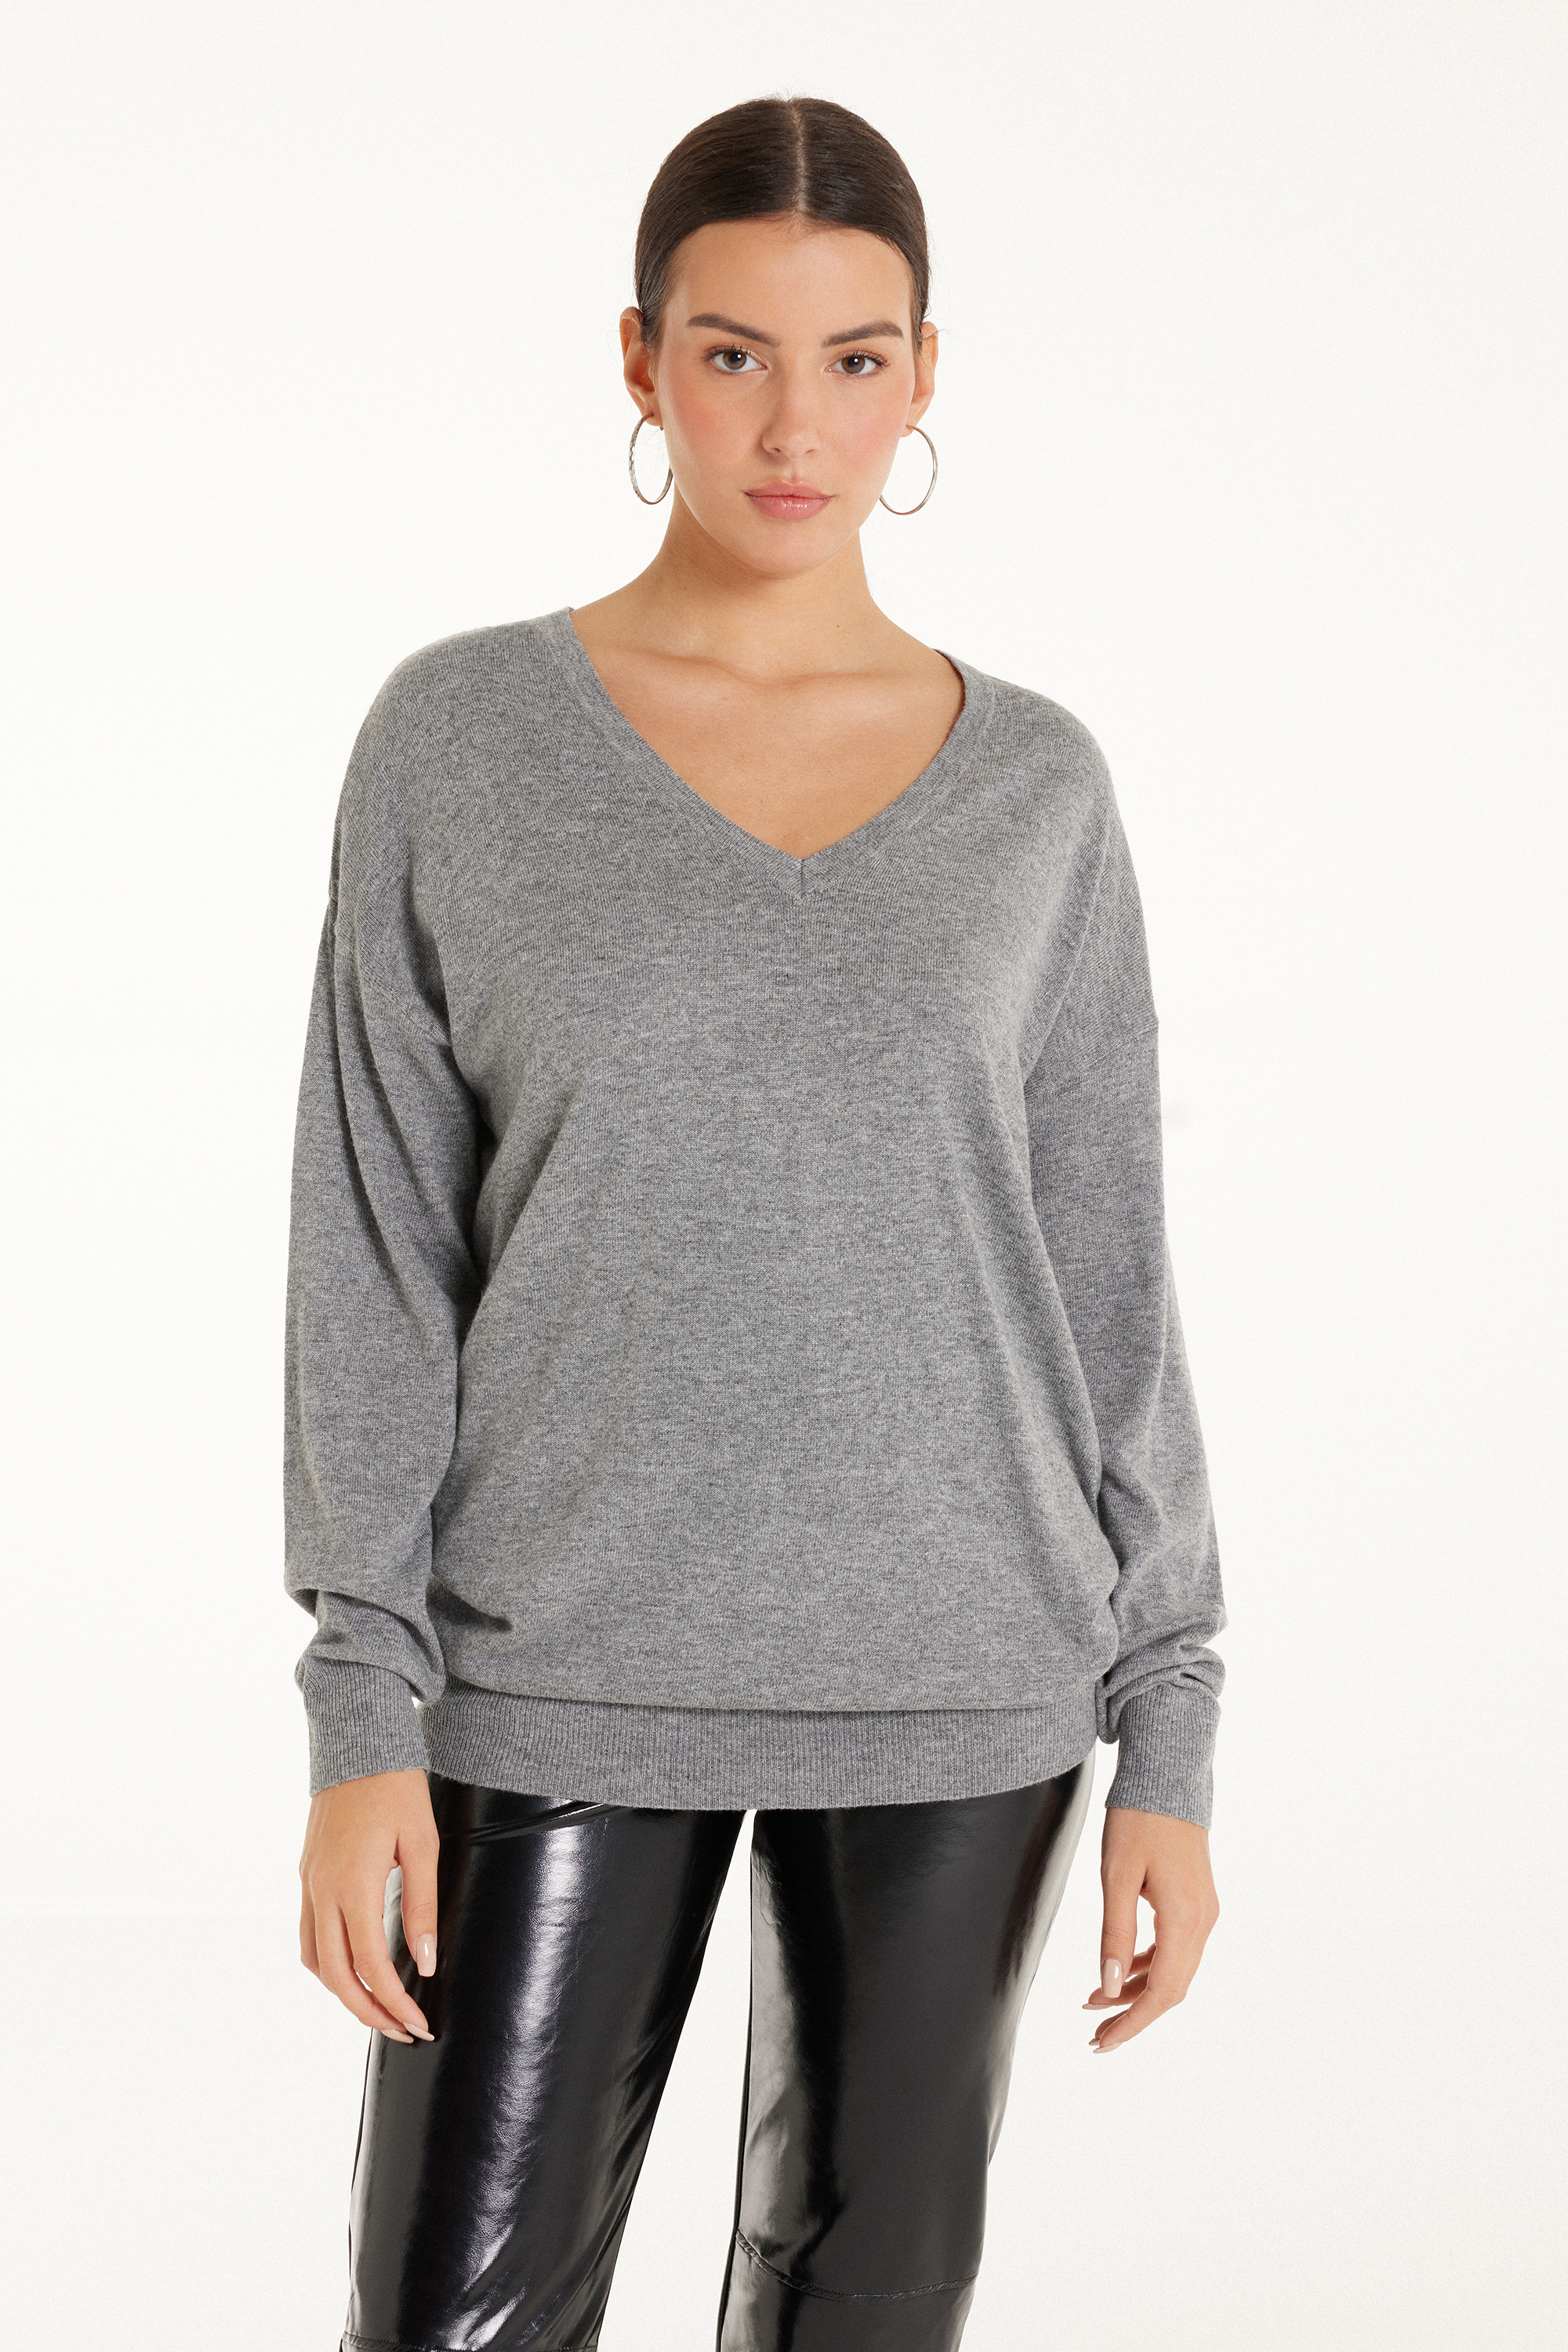 Long-Sleeved V-Neck Heavy Jersey with Wool